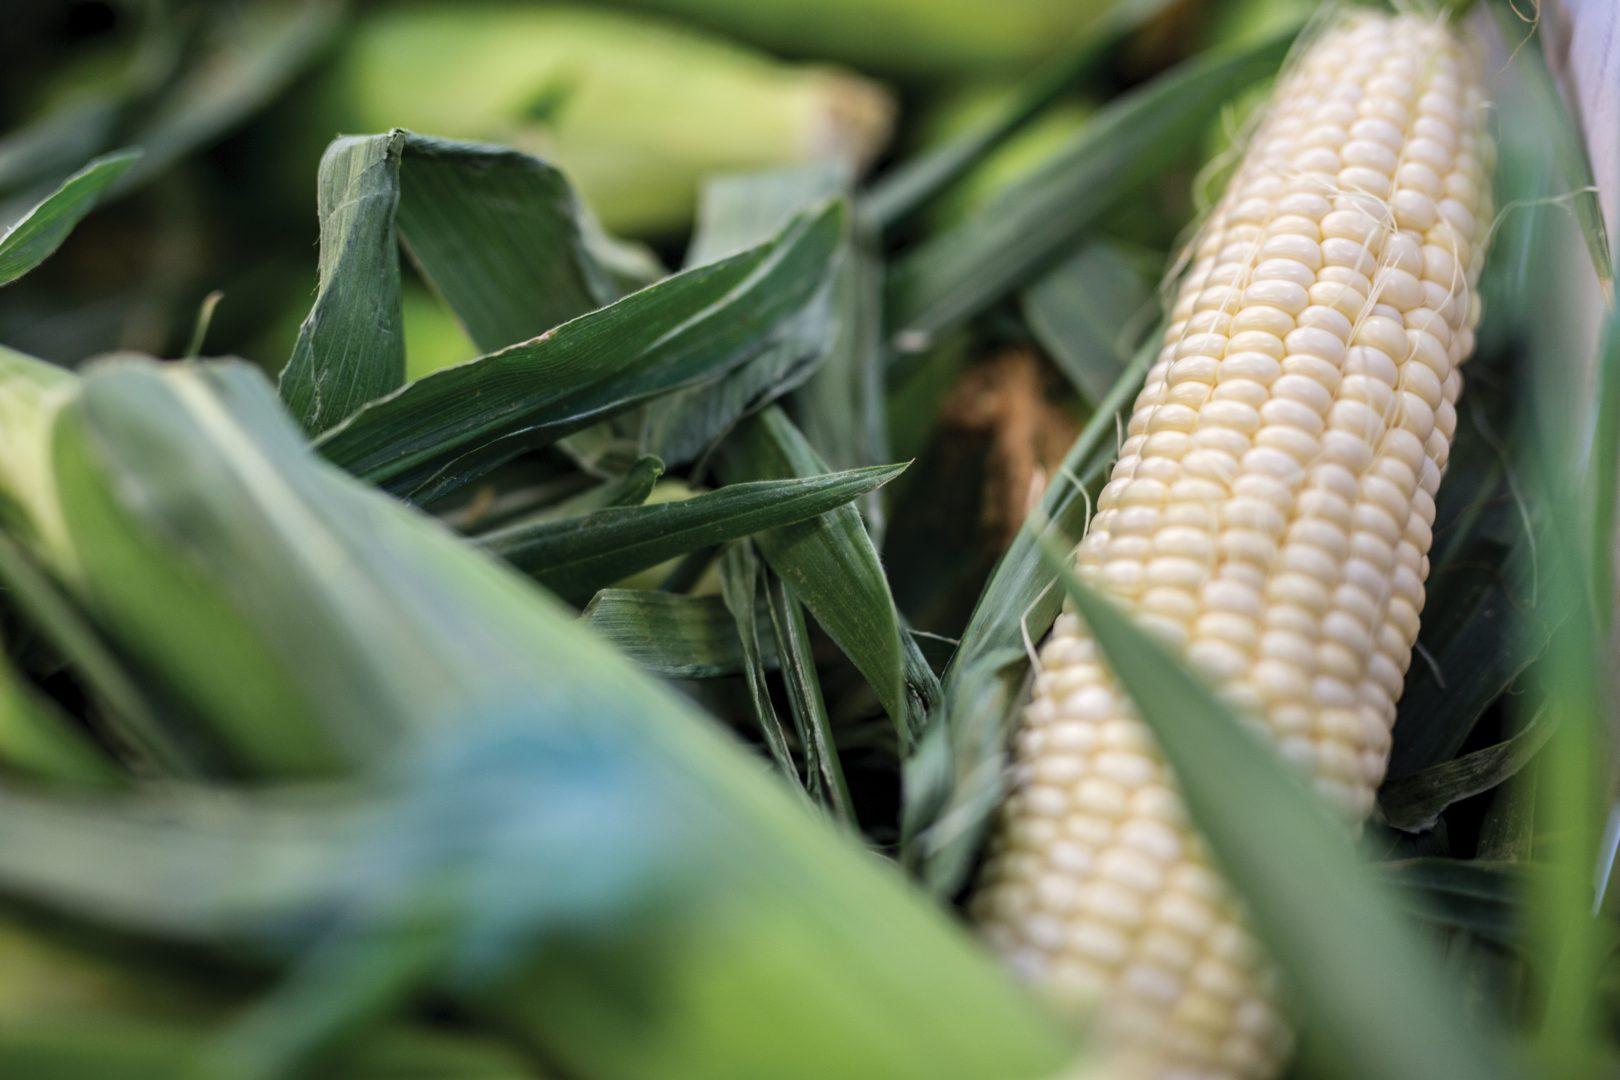 An ear of corn peaks through the leaf-filled container at the Gibson Farm Market on Sept. 20, 2017. The corn is one of the market’s most popular summer item. (Daniel Avalos/The Collegian)